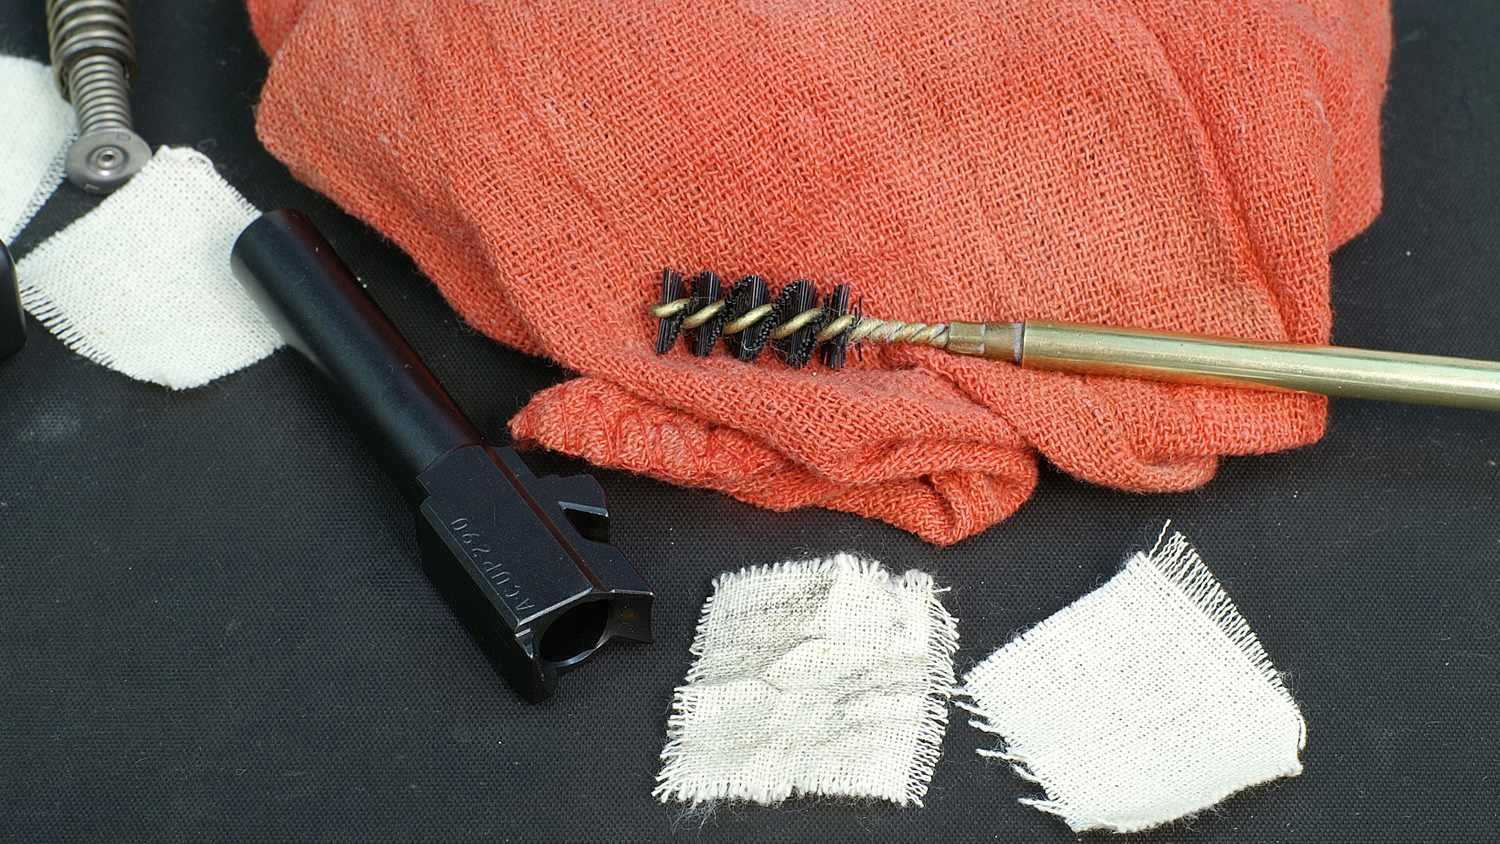 Cleaning your brand-new gun